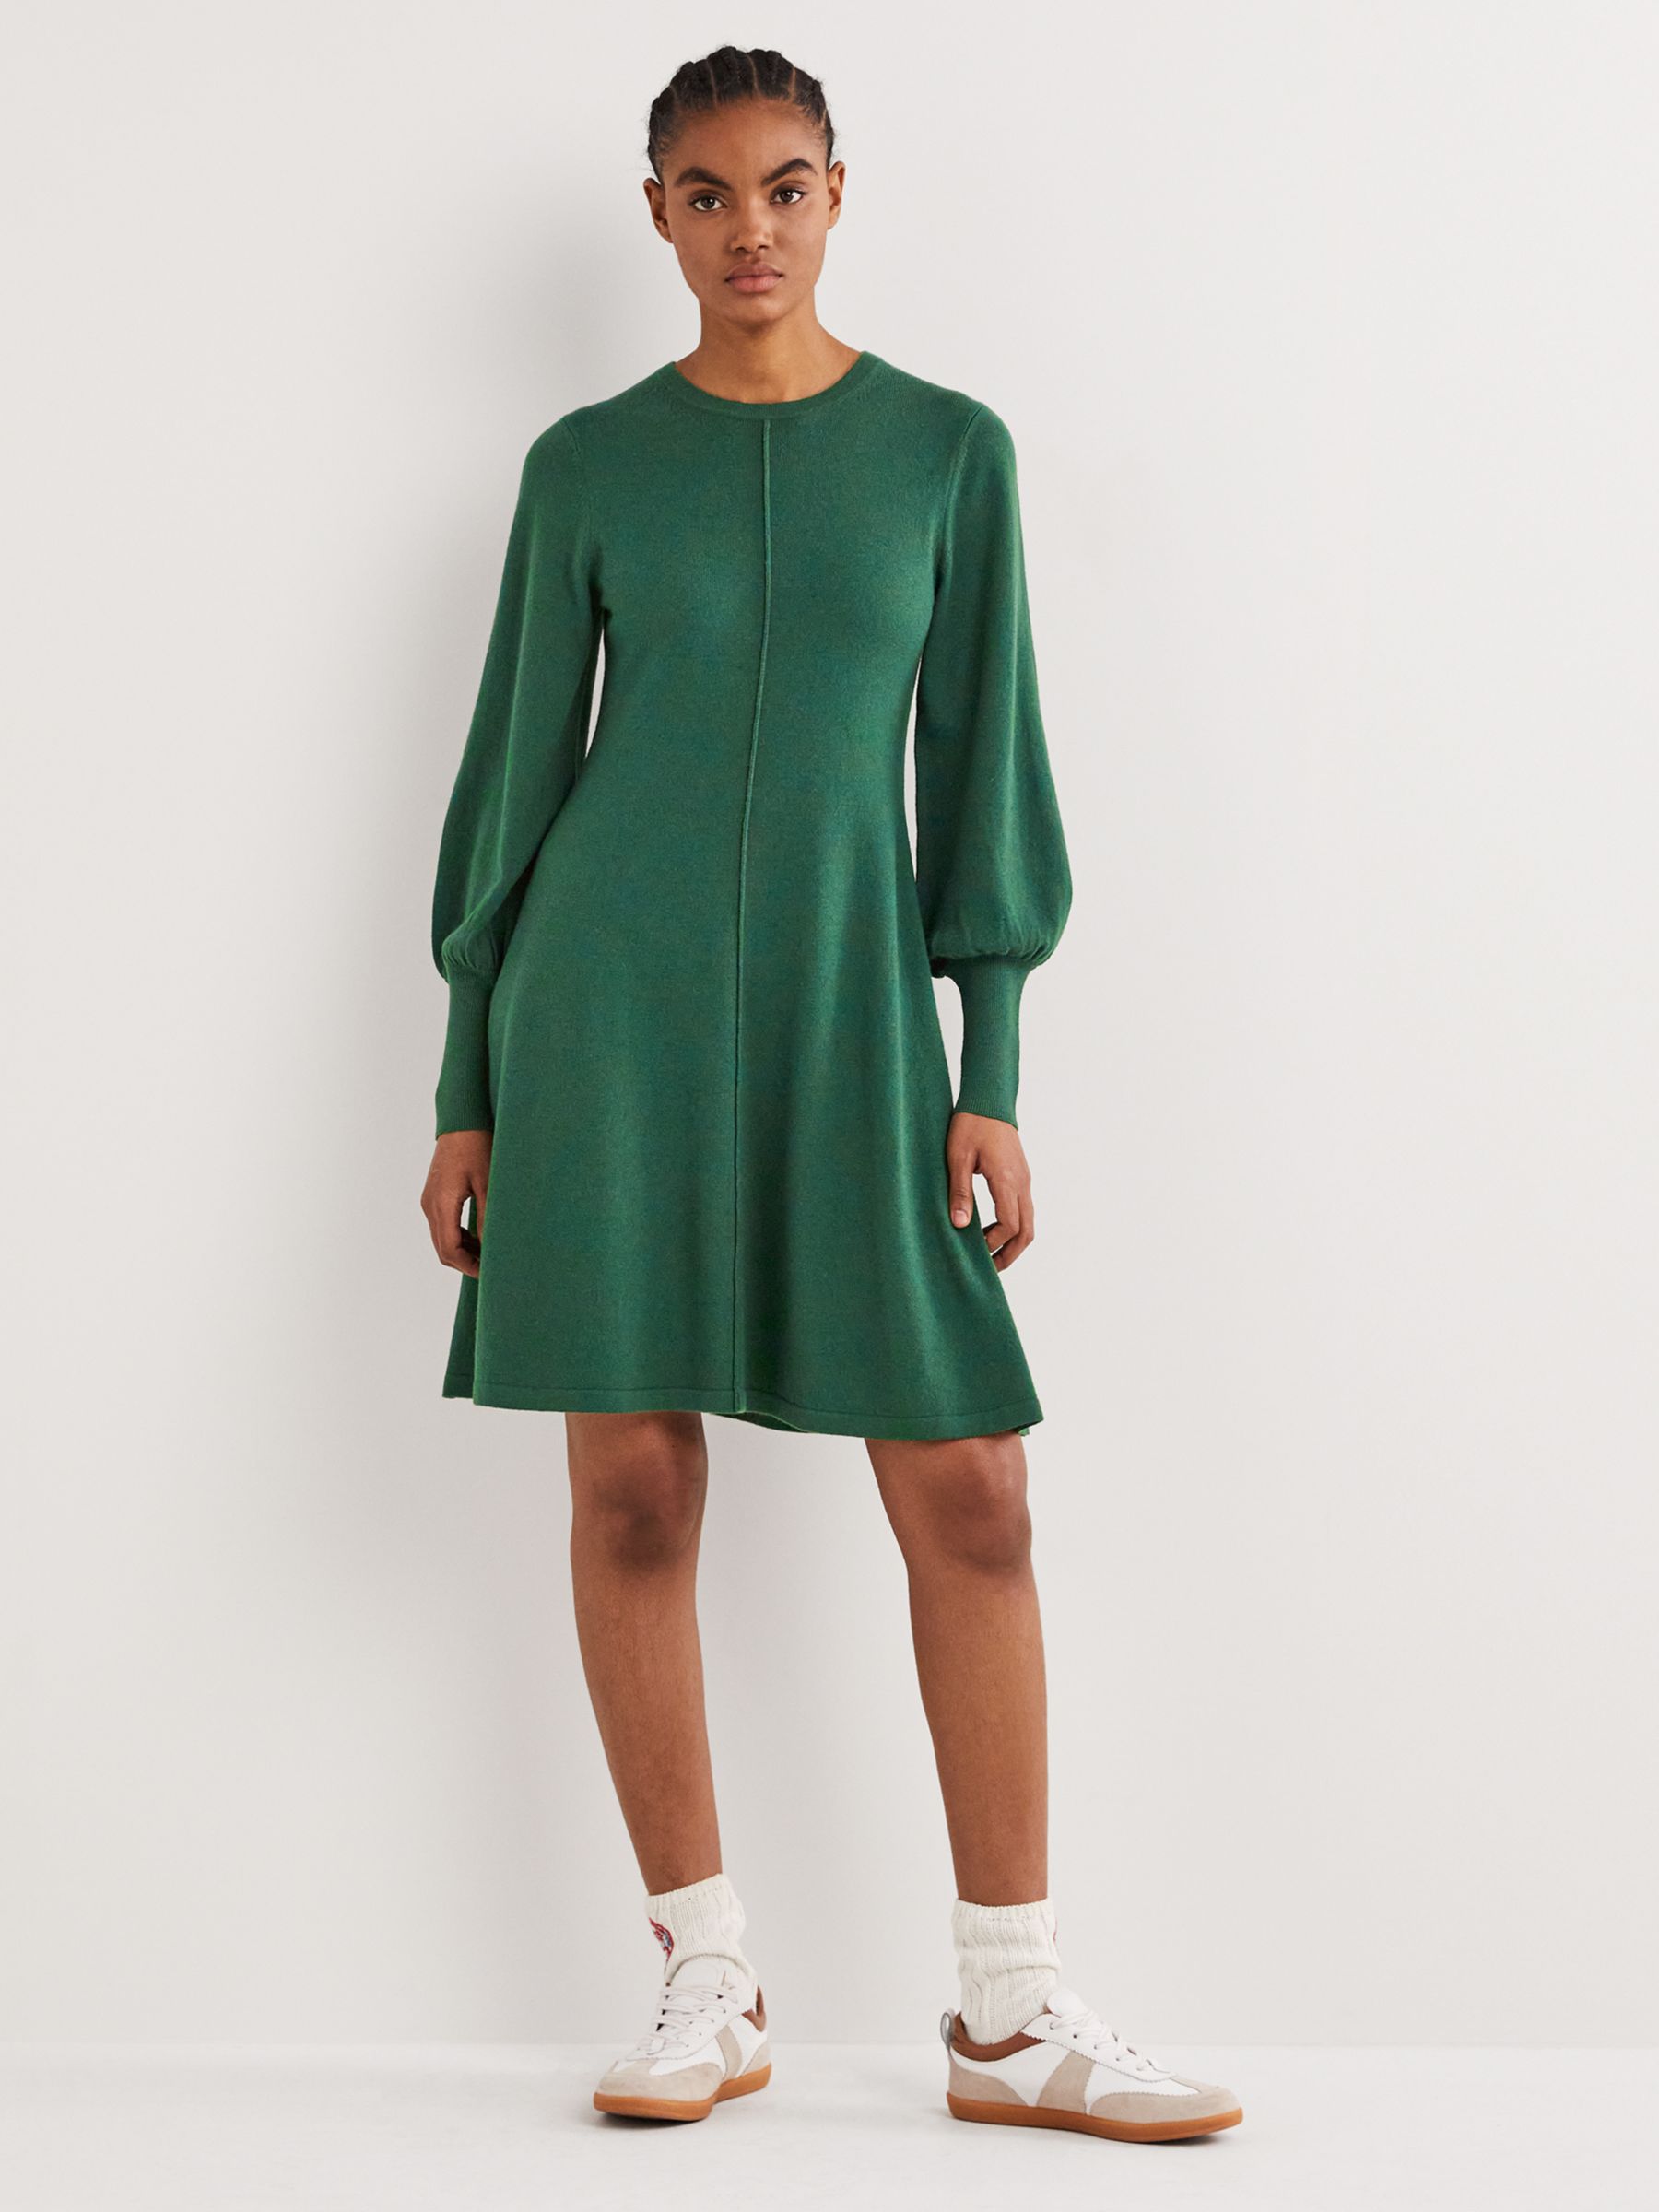 Boden Cashmere and Wool Blend Knitted Mini Dress